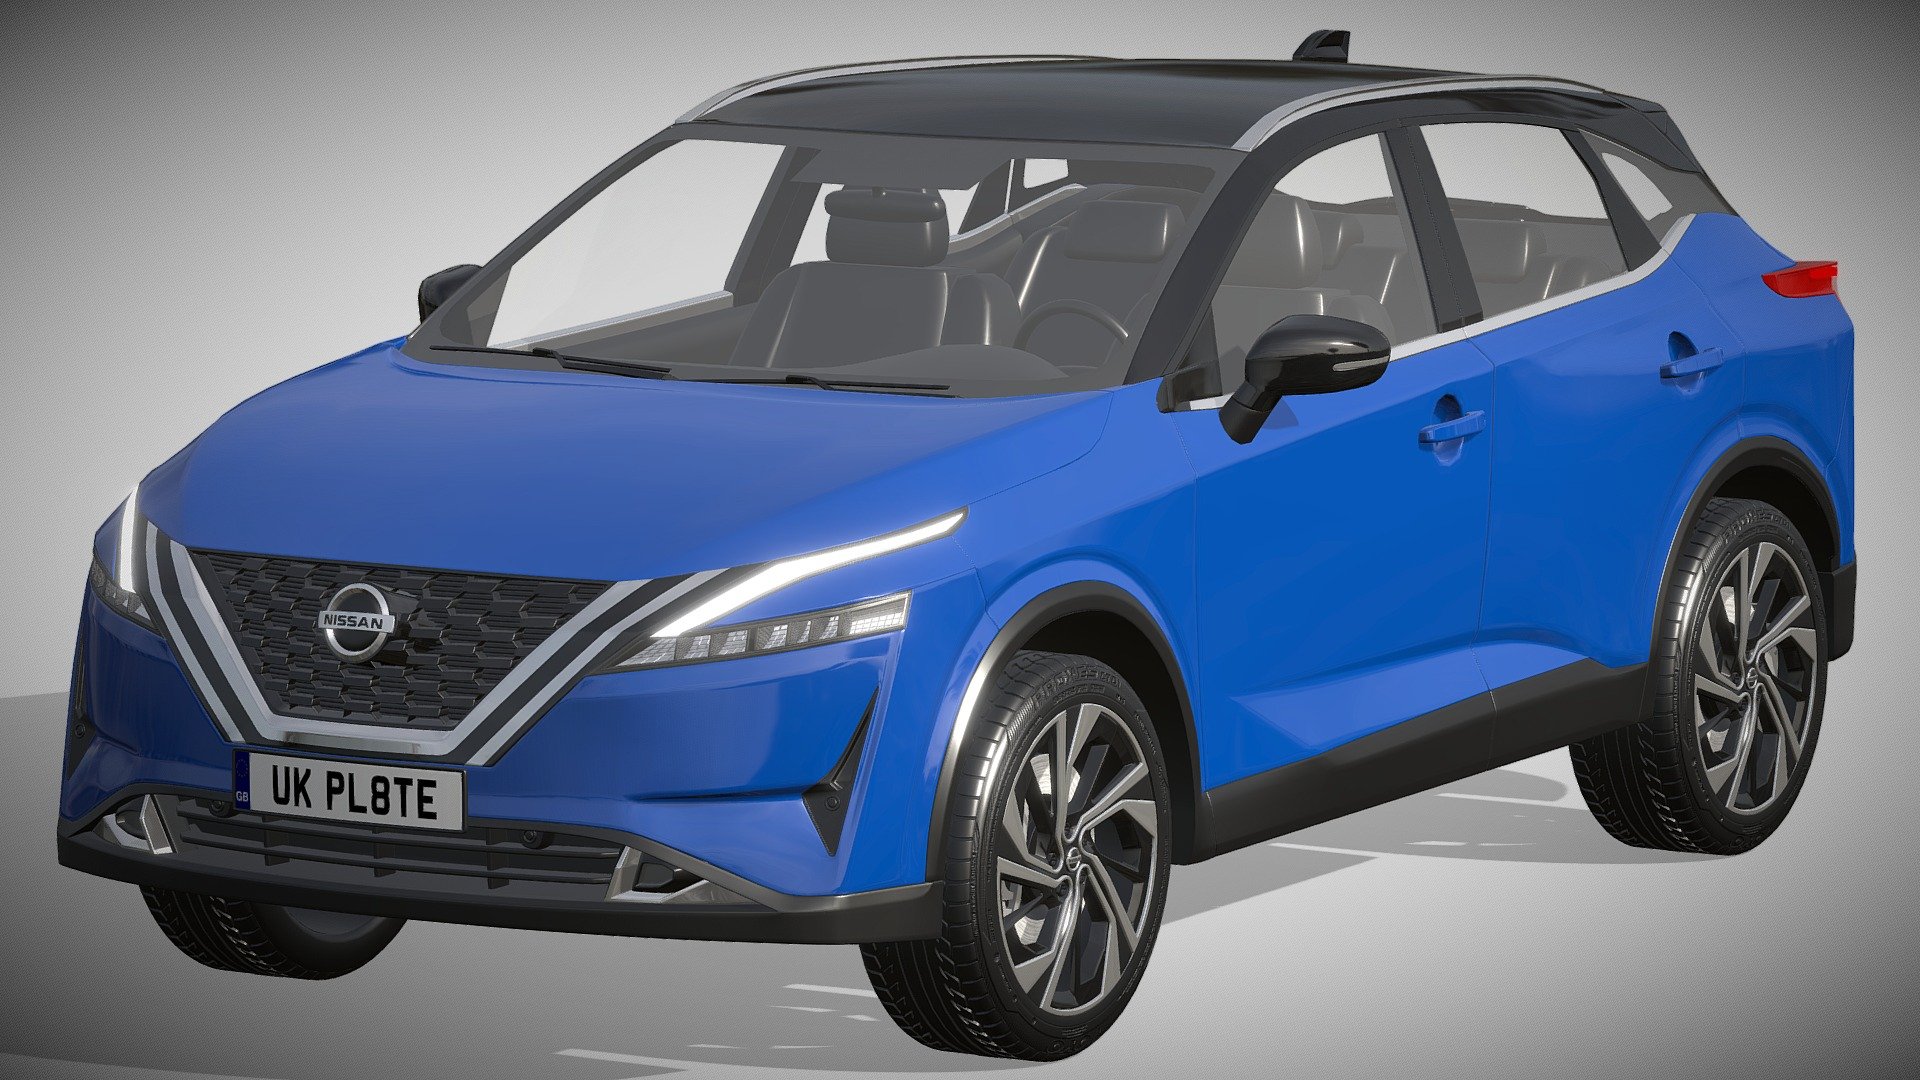 Nissan Qashqai 2022

https://www.nissan.de/fahrzeuge/neuwagen/qashqai.html

Clean geometry Light weight model, yet completely detailed for HI-Res renders. Use for movies, Advertisements or games

Corona render and materials

All textures include in *.rar files

Lighting setup is not included in the file! - Nissan Qashqai 2022 - Buy Royalty Free 3D model by zifir3d 3d model